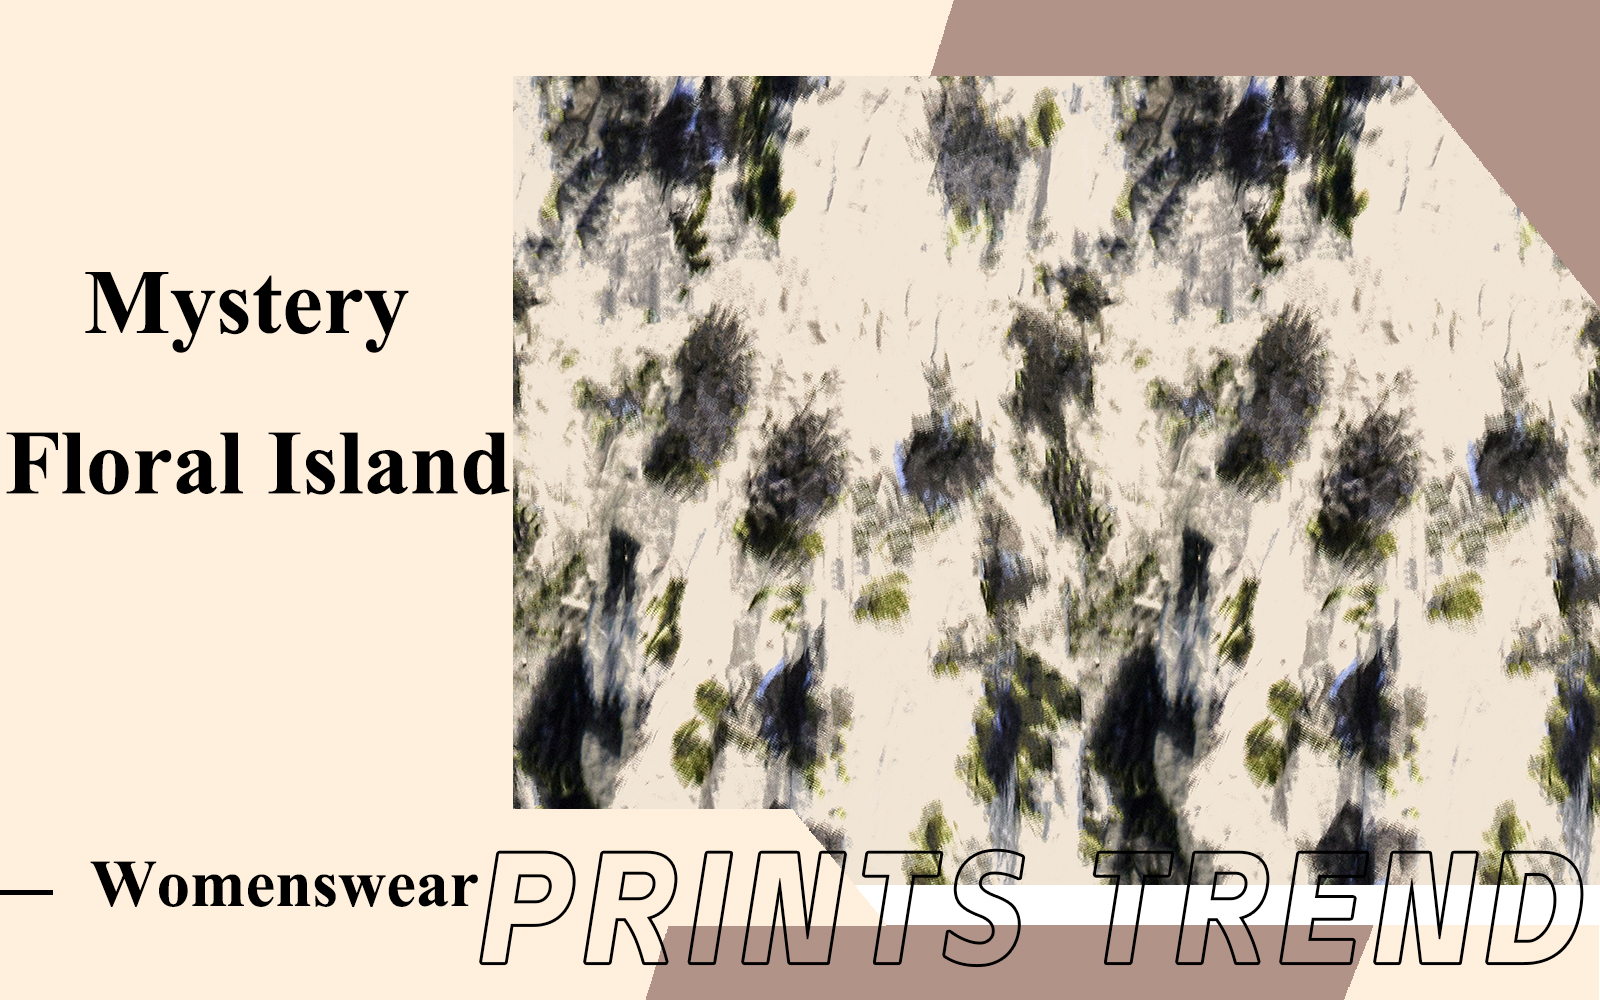 Mystery Floral Island -- The Fast-Response Pattern Trend for Womenswear